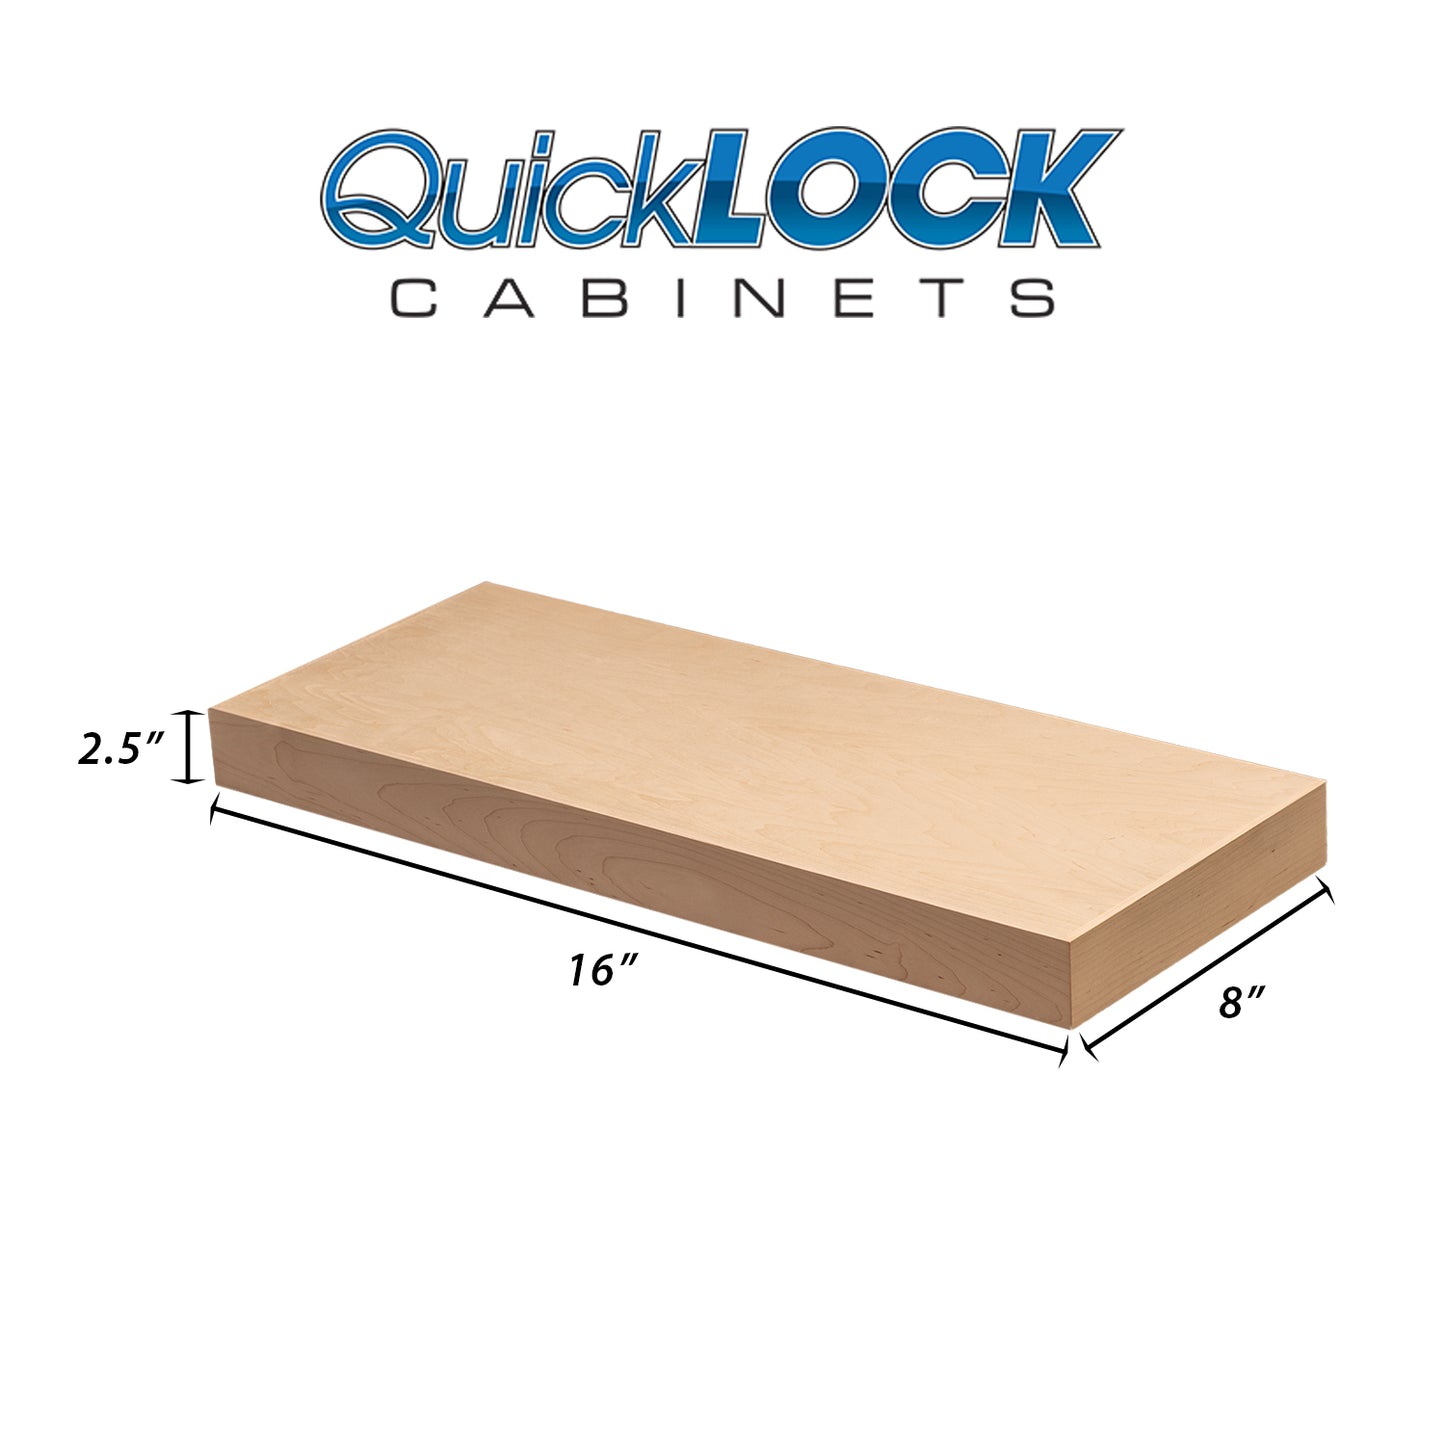 Quicklock Cabinets Floating Shelves | 2.5" Thick | Raw Maple, 8" D x 16" W x 2.5" H | American Made | Hardwood Bracket | Complete Shelf Unit